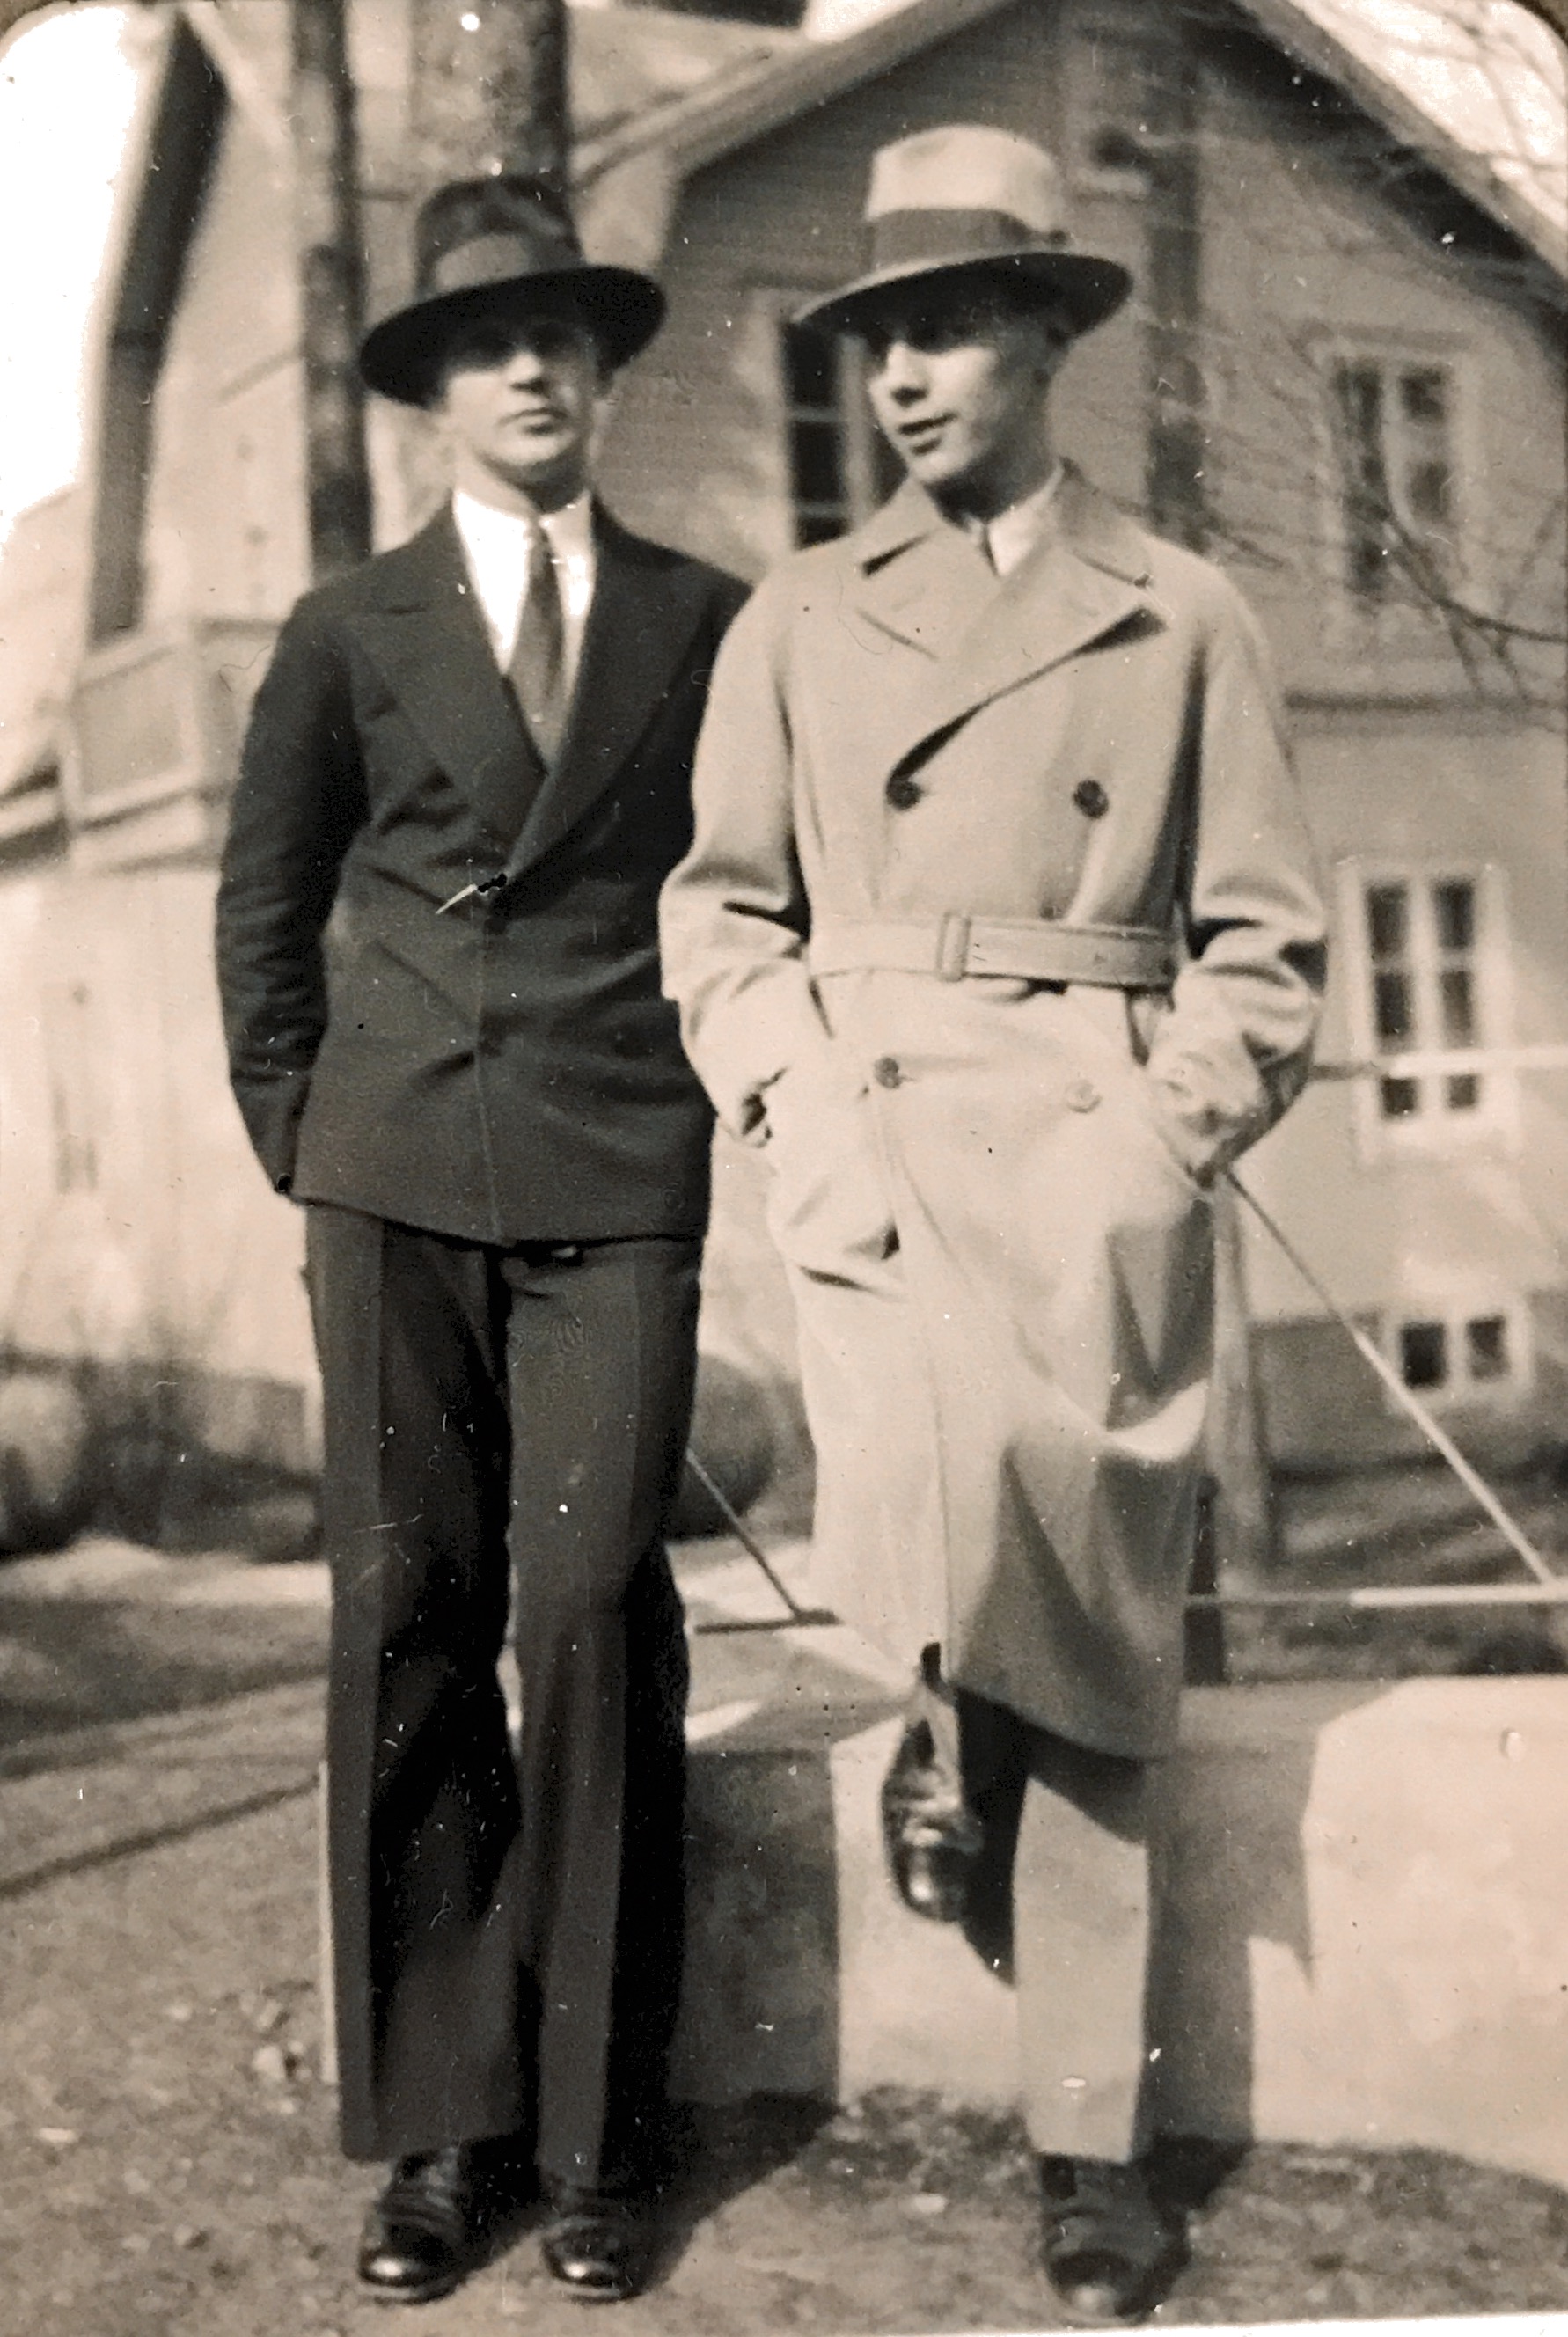 My dad Bror Nic Rydell, 18, (right) with buddy Henning Johansson before the house grandpa built in 1920 in Krokom, Sweden